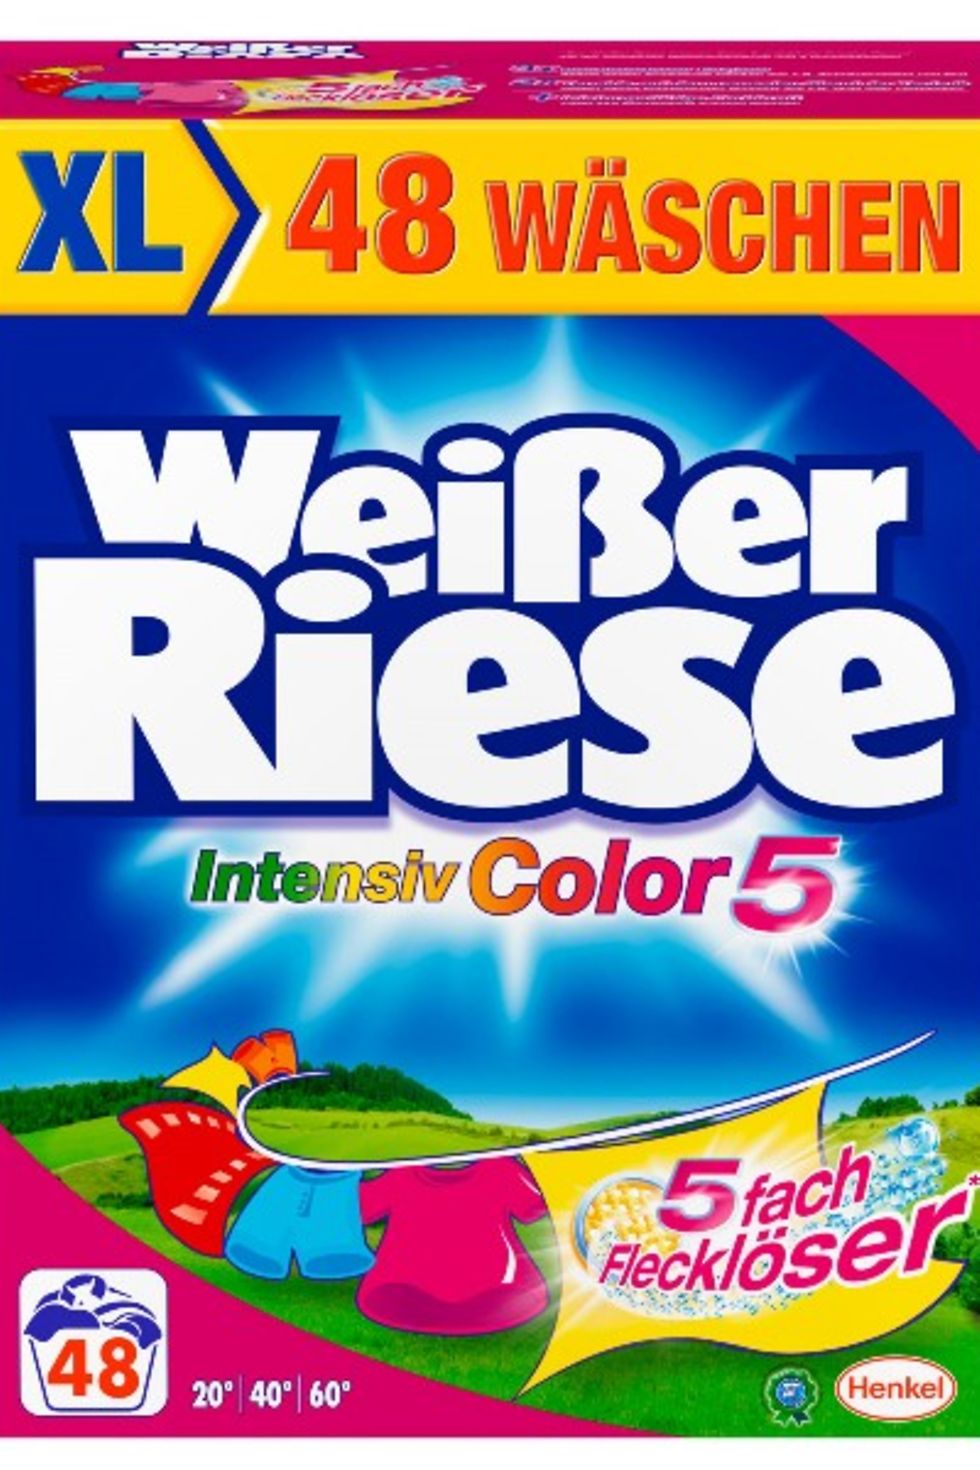 Weißer Riese Intensiv Color 5